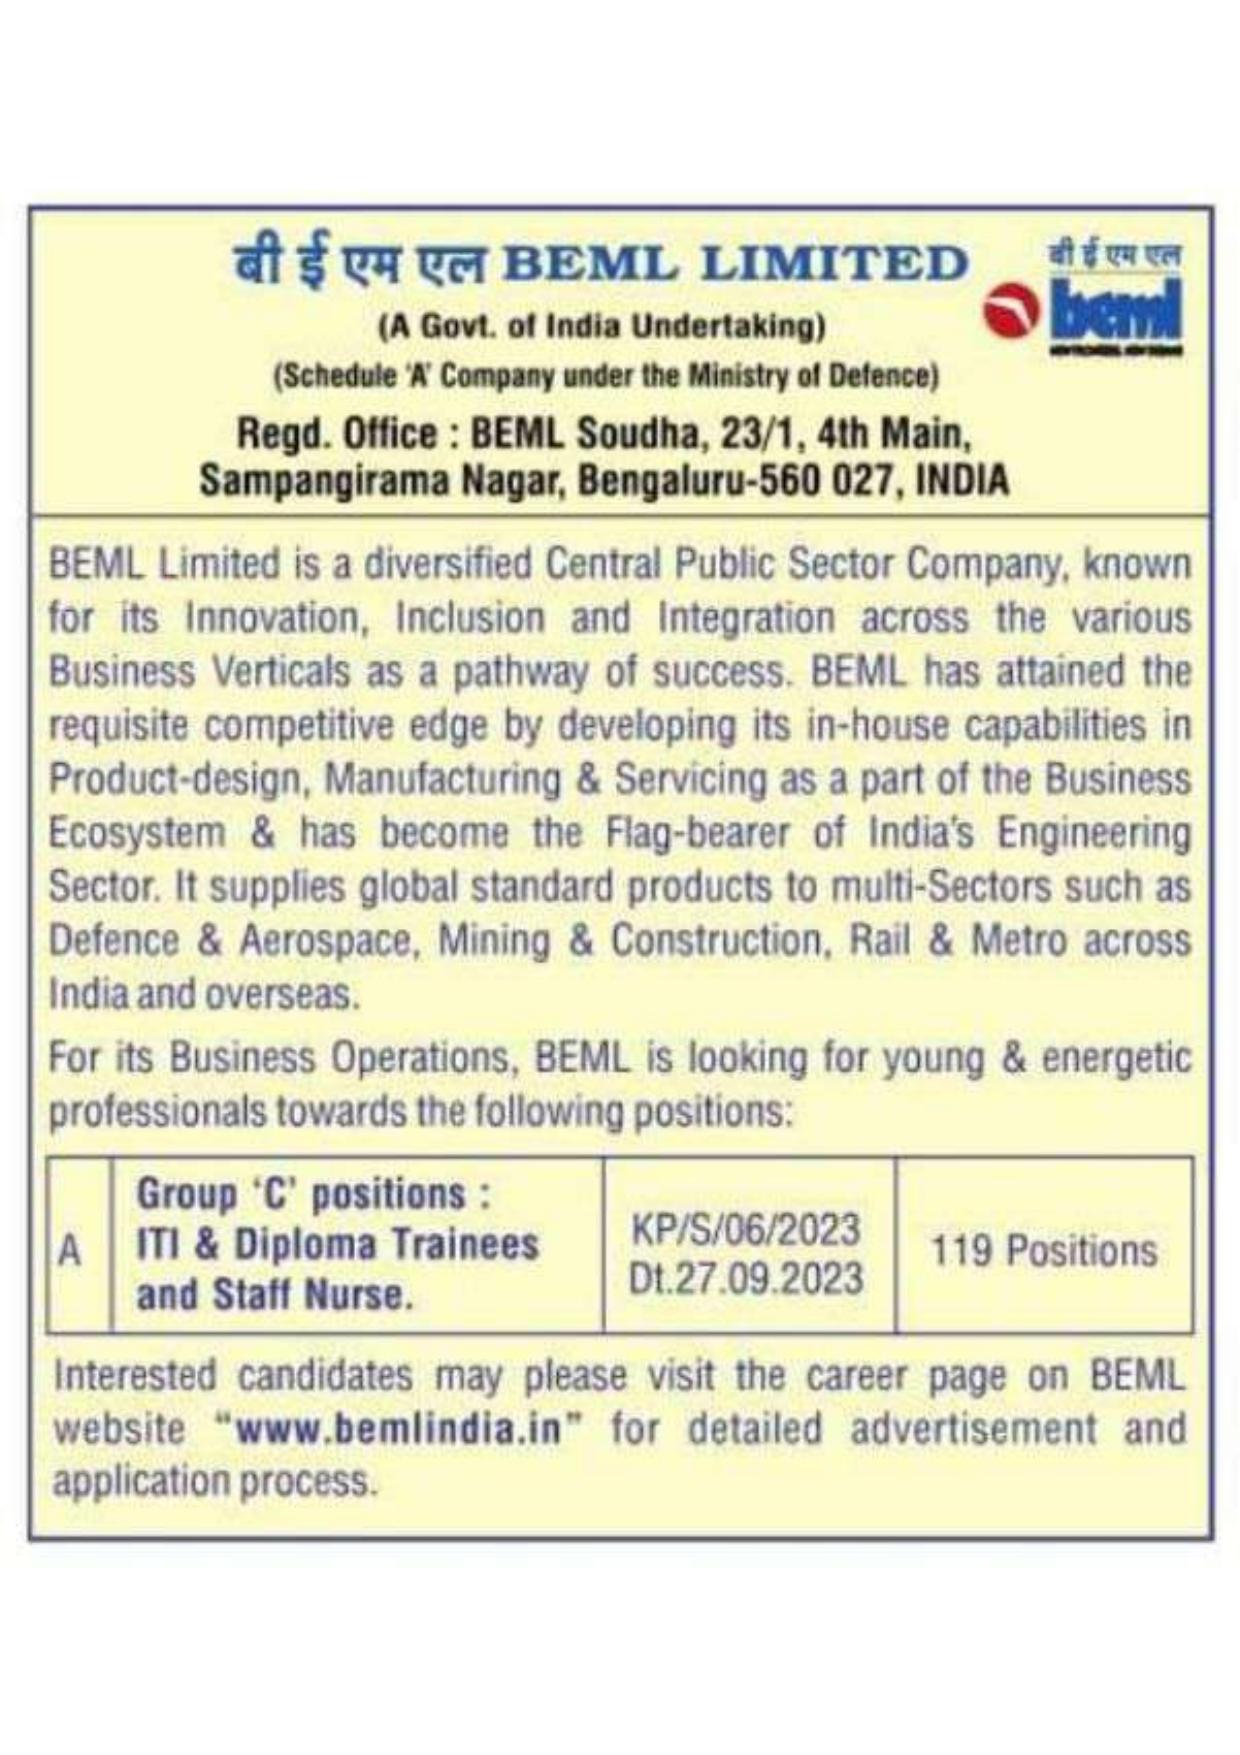 BEML Limited Group C Posts - ITI & Diploma Trainee and Staff Nurse Recruitment 2023 - Page 1